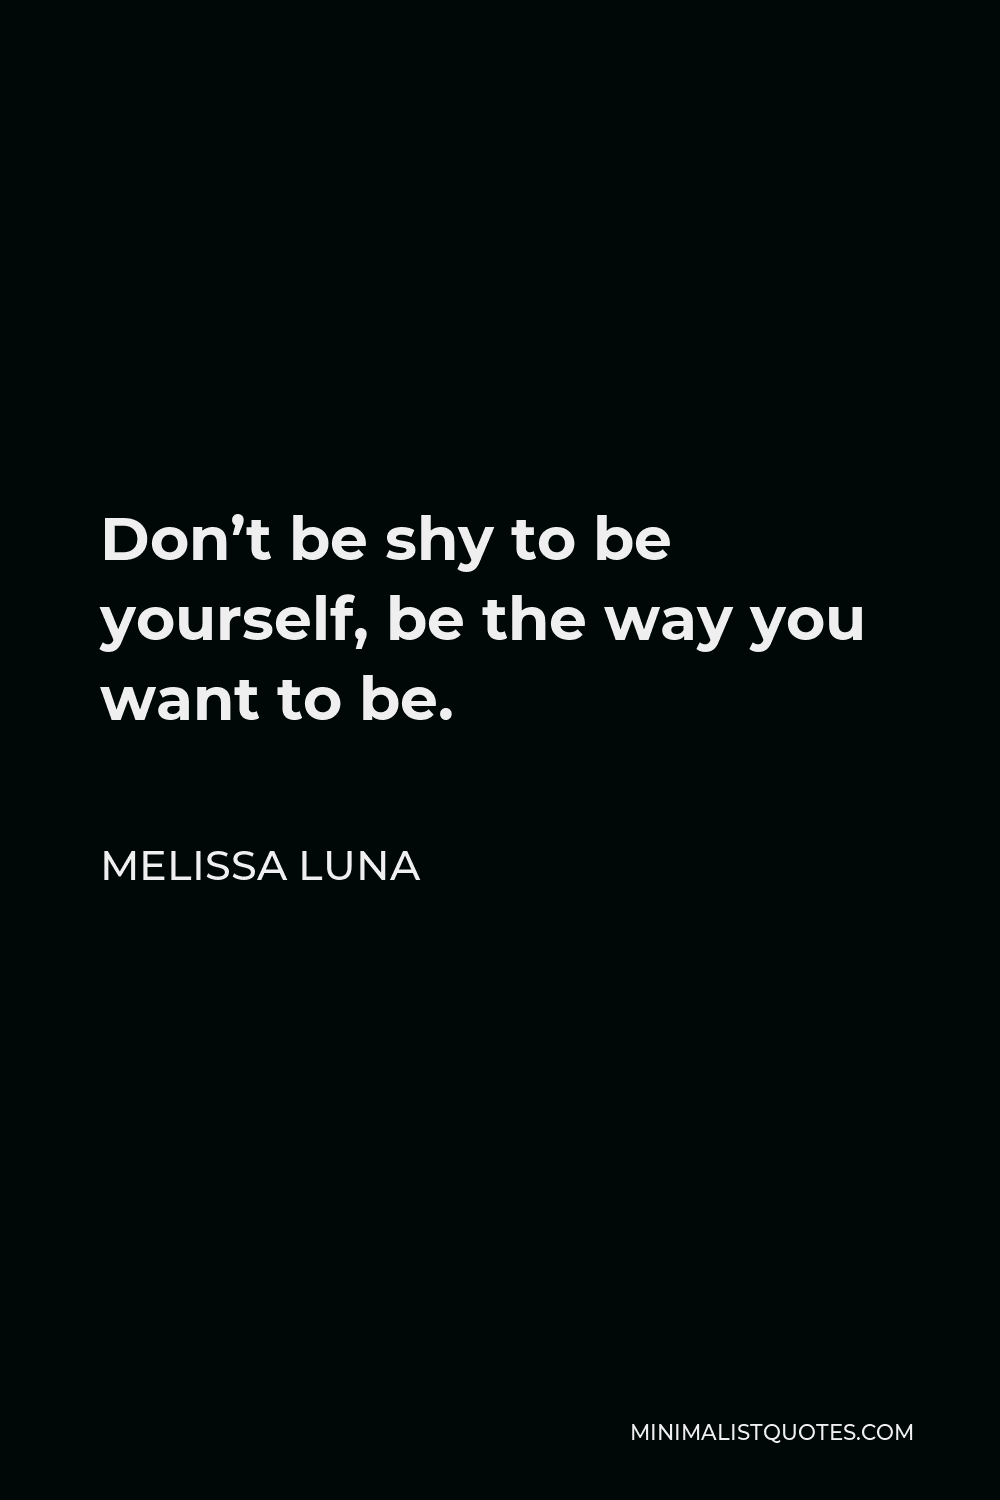 Melissa Luna Quote - Don’t be shy to be yourself, be the way you want to be.